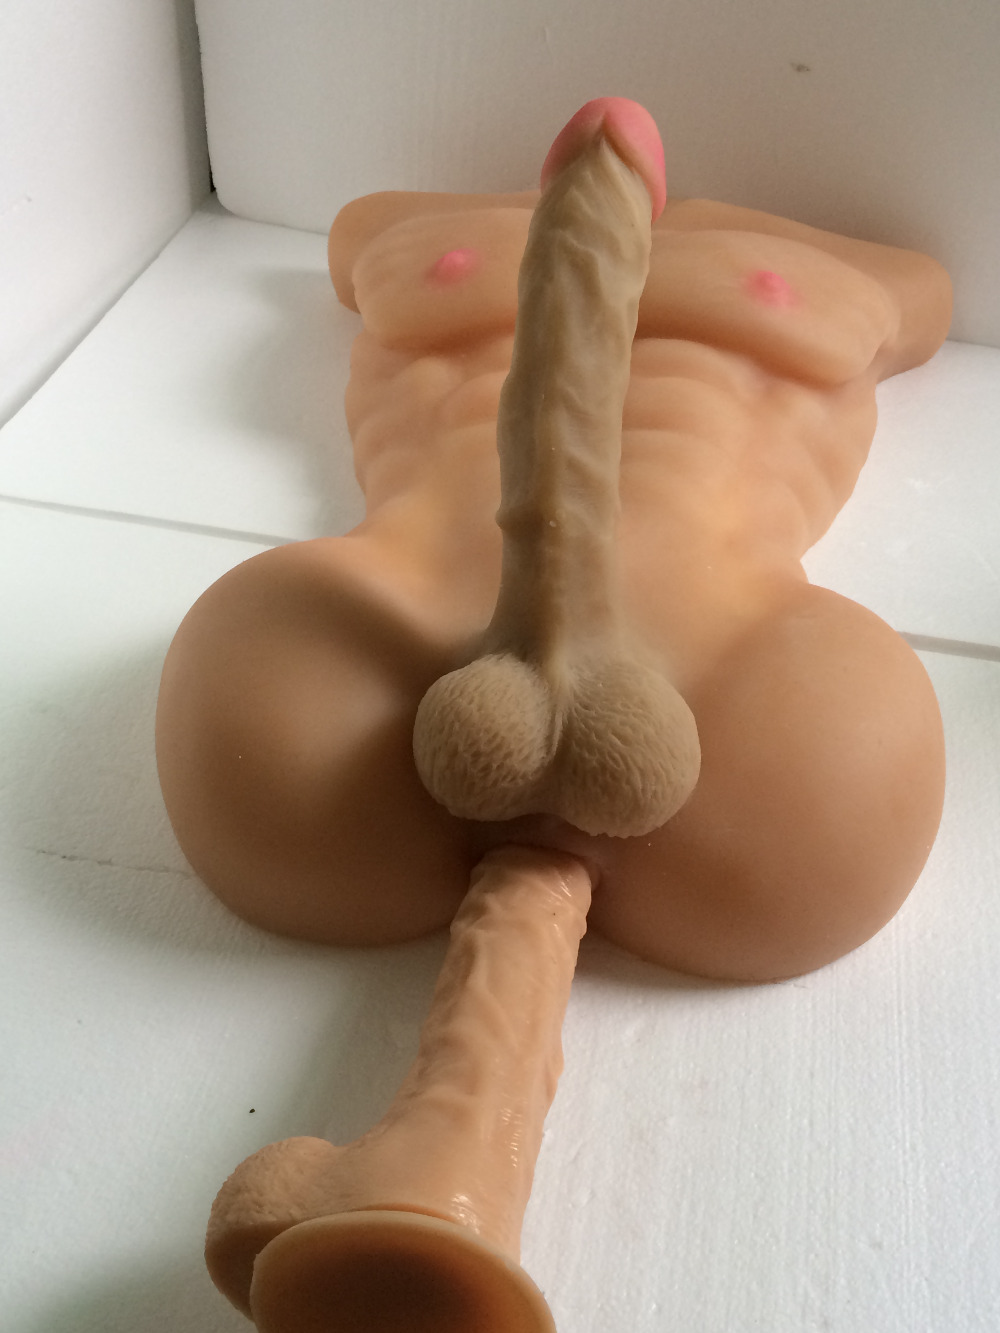 Best sex toy ever